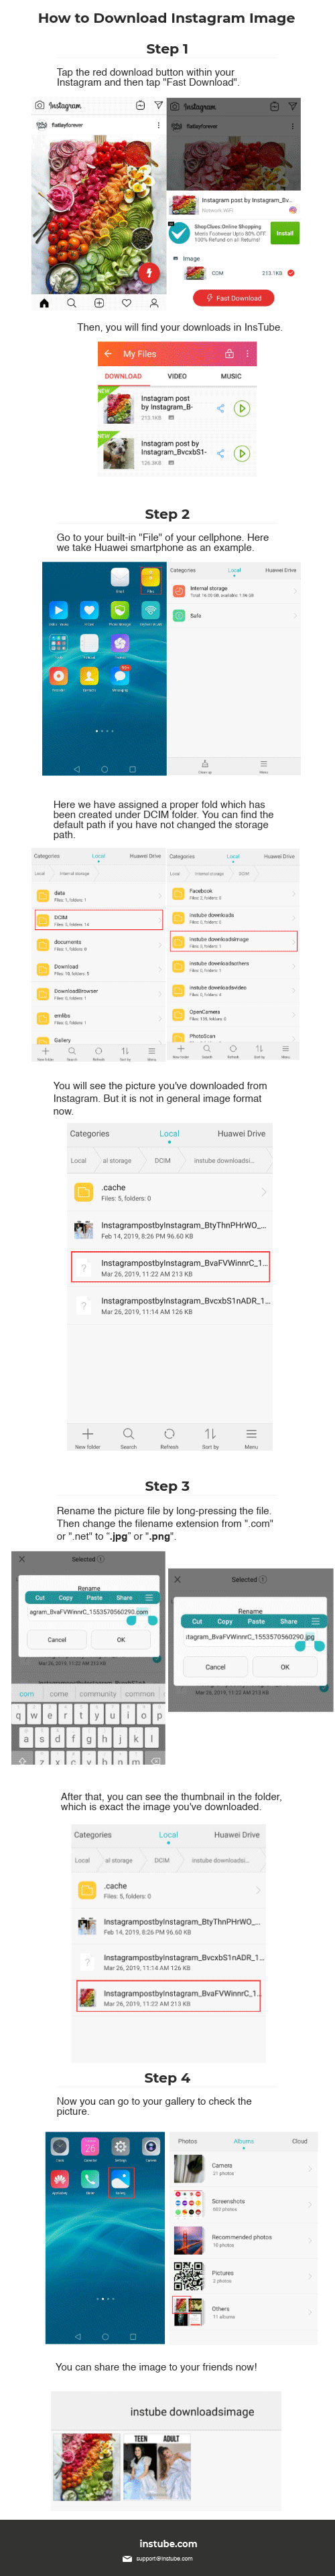 how to download Instagram picture InsTube